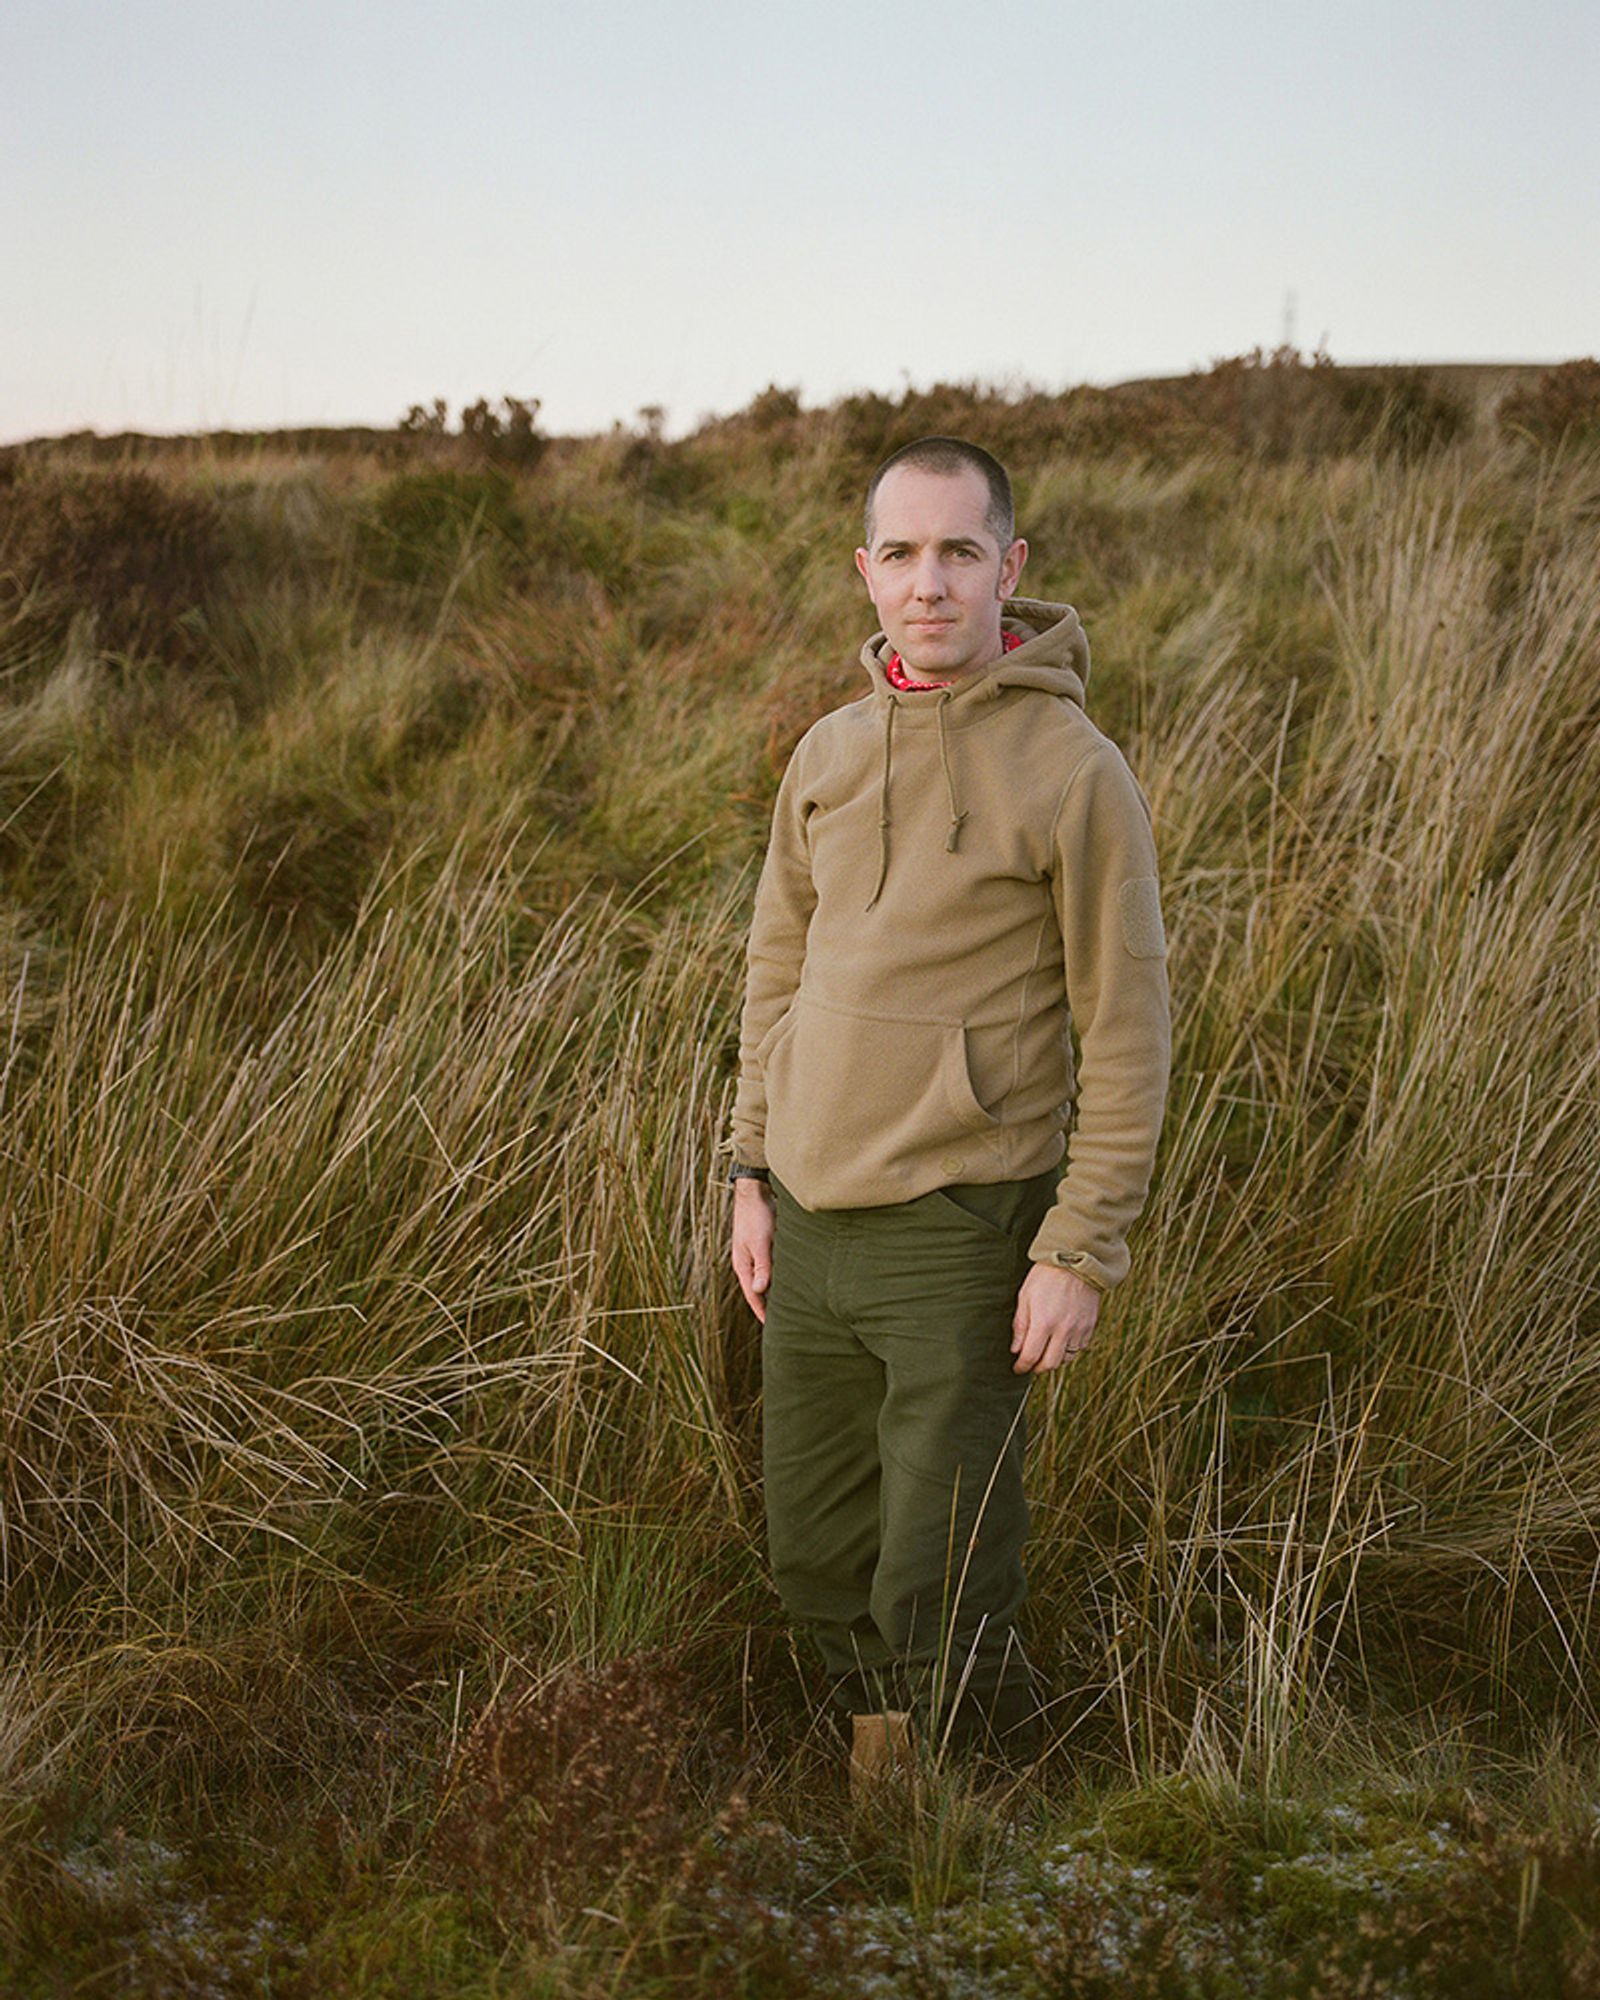 © Sophie Gerrard - Paul, RSPB warden, from the series 'The Flows'